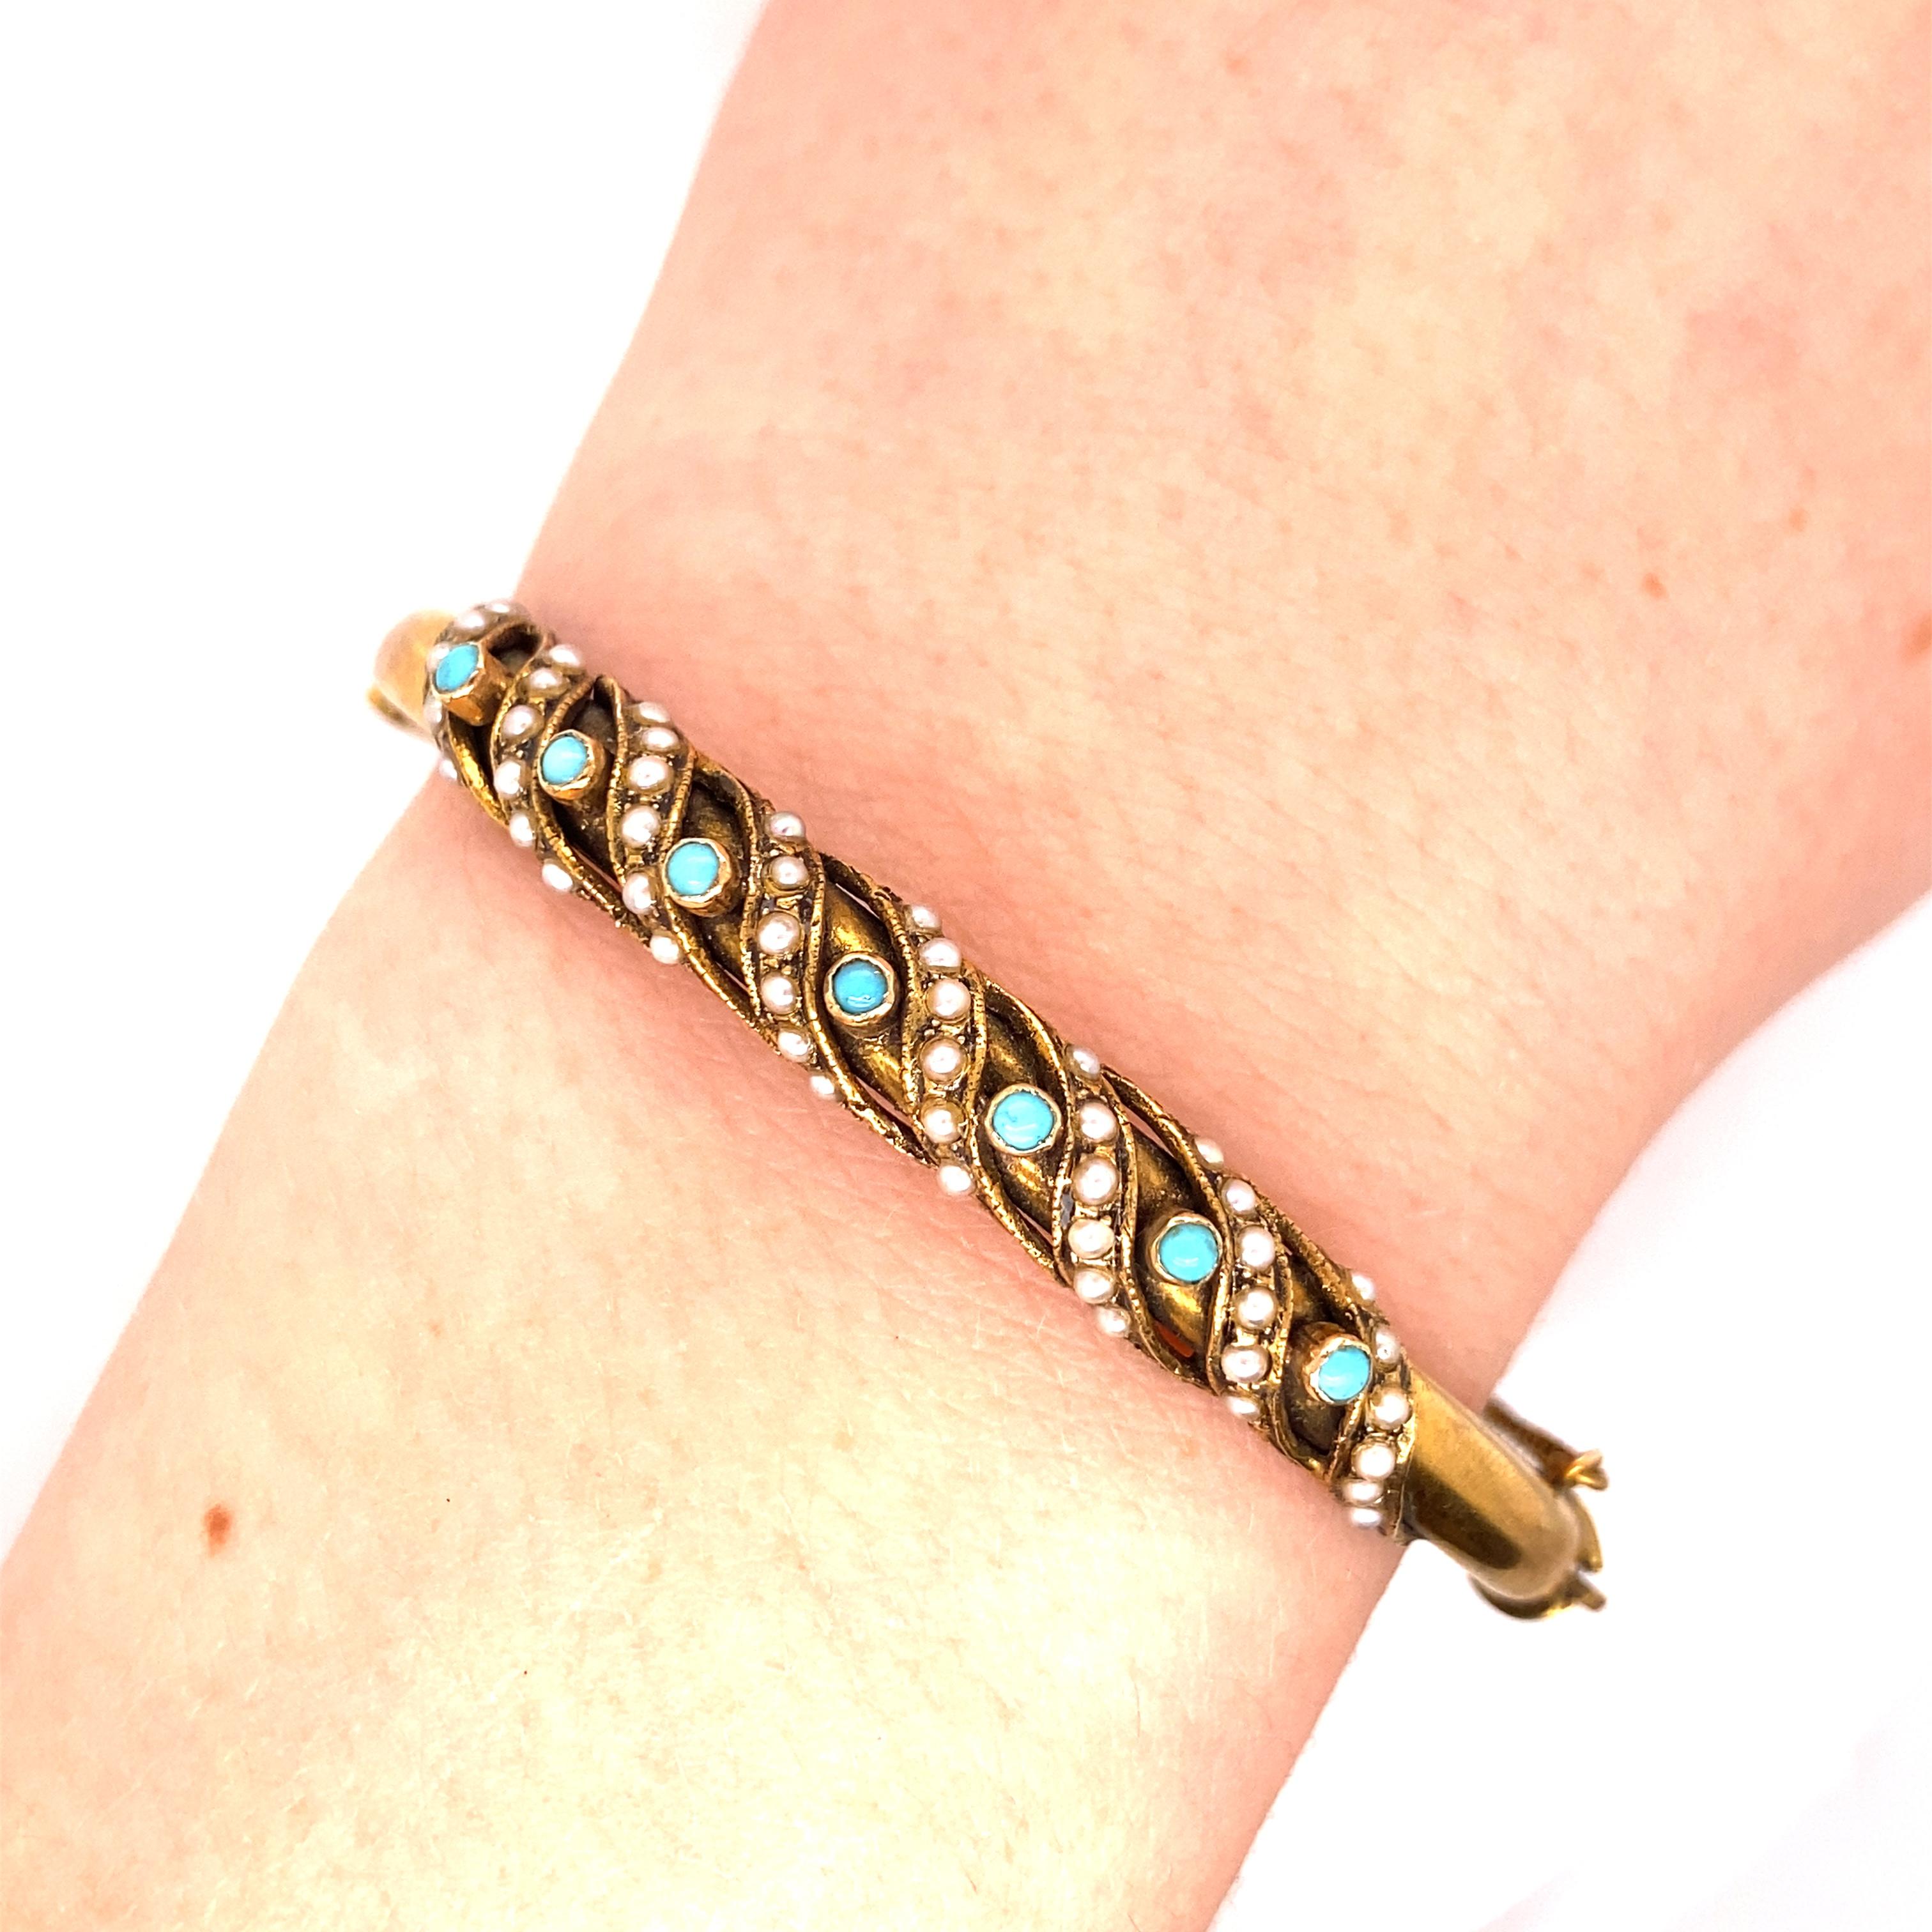 Vintage 1970's 14K Yellow Gold Bangle Bracelet with Turquoise and Seed Pearls - The bangle contains 7 small turquoise stones and 8 ribbons of seed pearls - 6 pearls in each. The bracelet's width is .25 inches. The inside diameter is 2.25 inches high